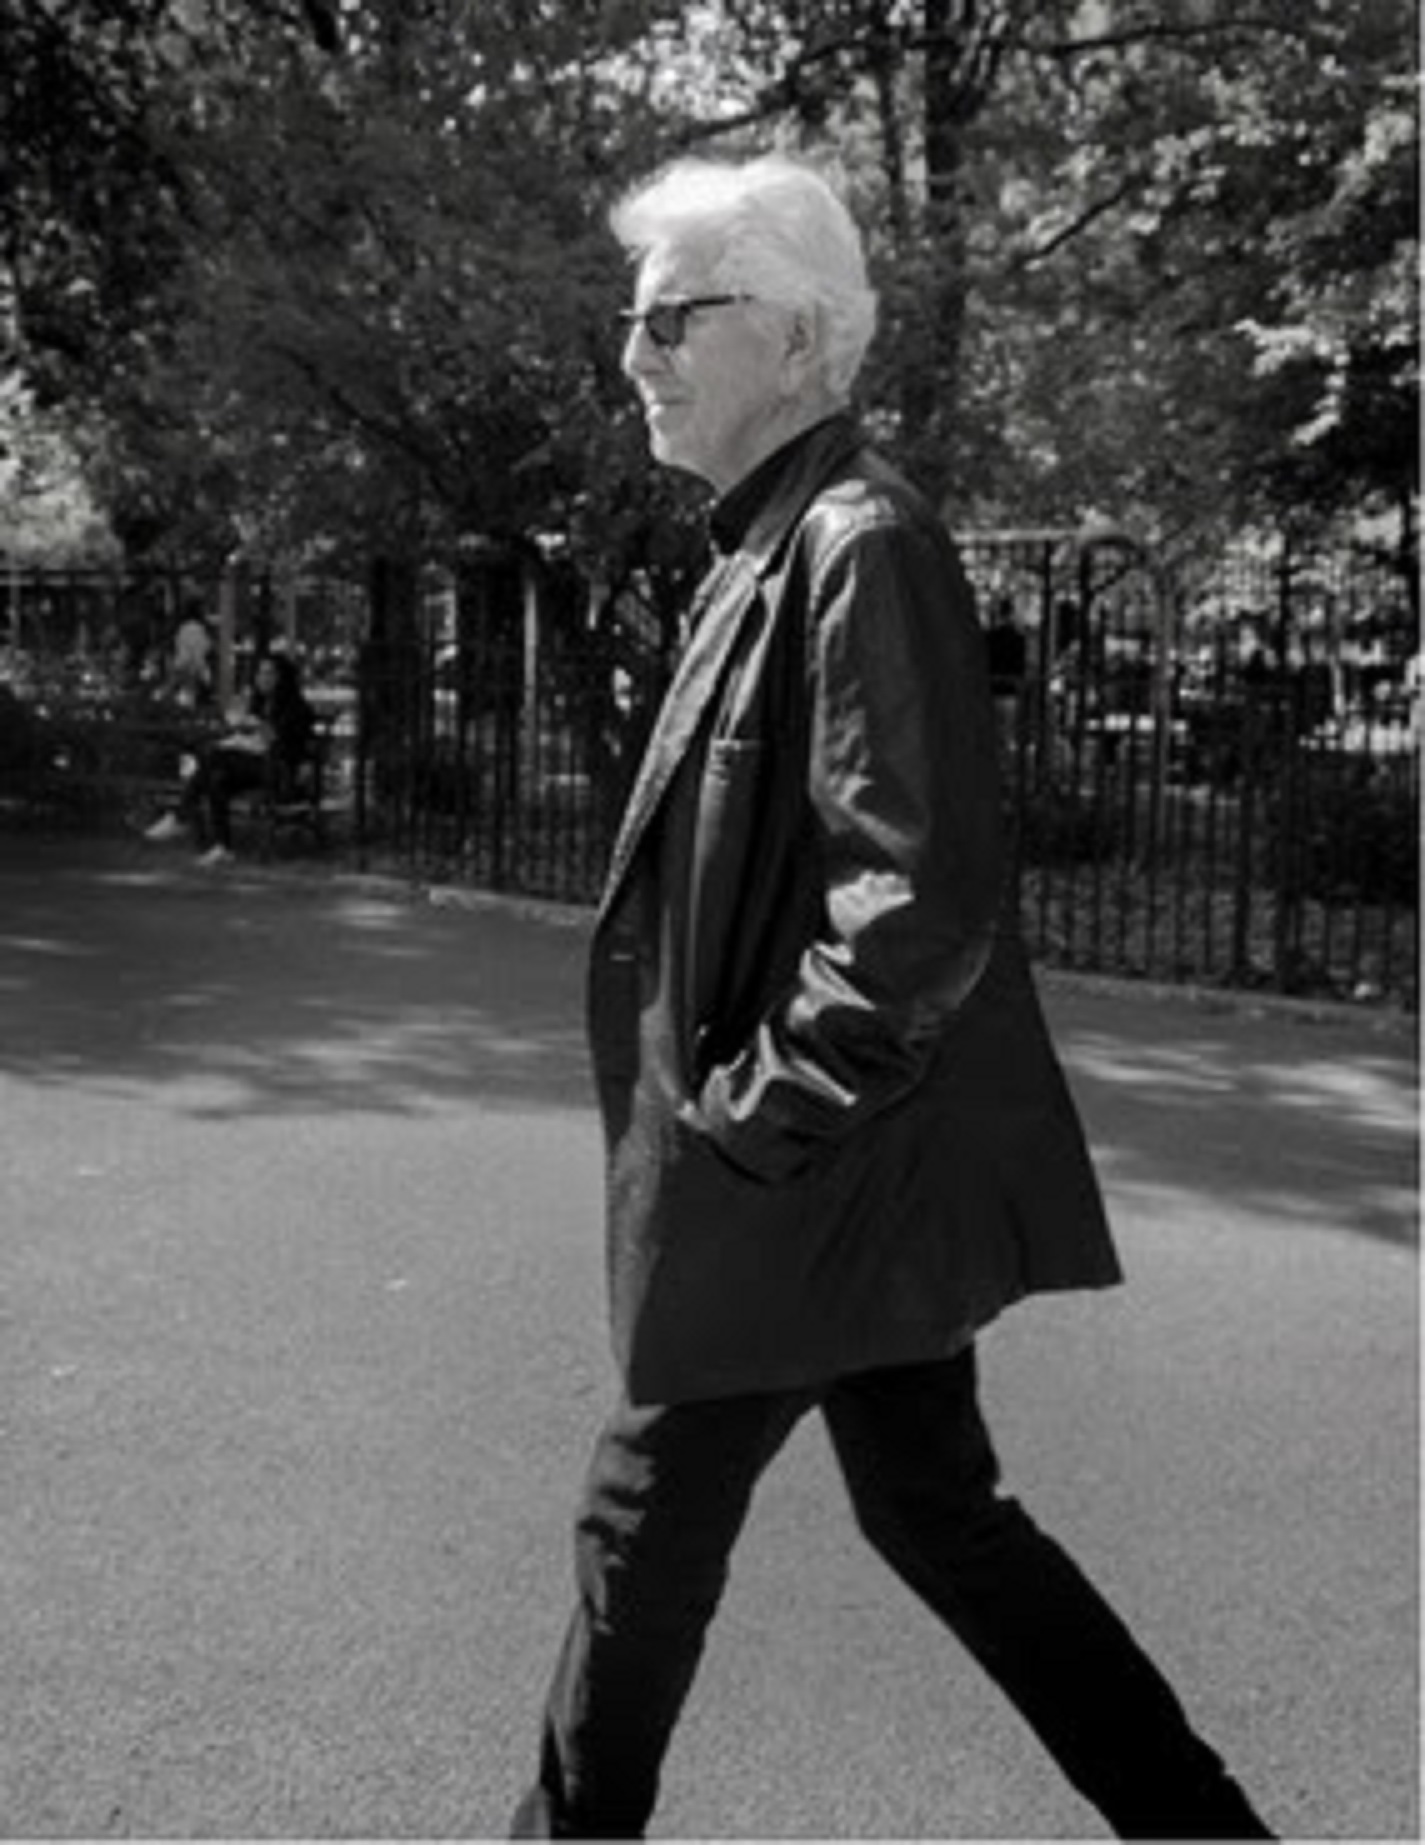 Graham Nash sets new 2023 tour dates; first new studio record in 7 years due in Spring, 2023